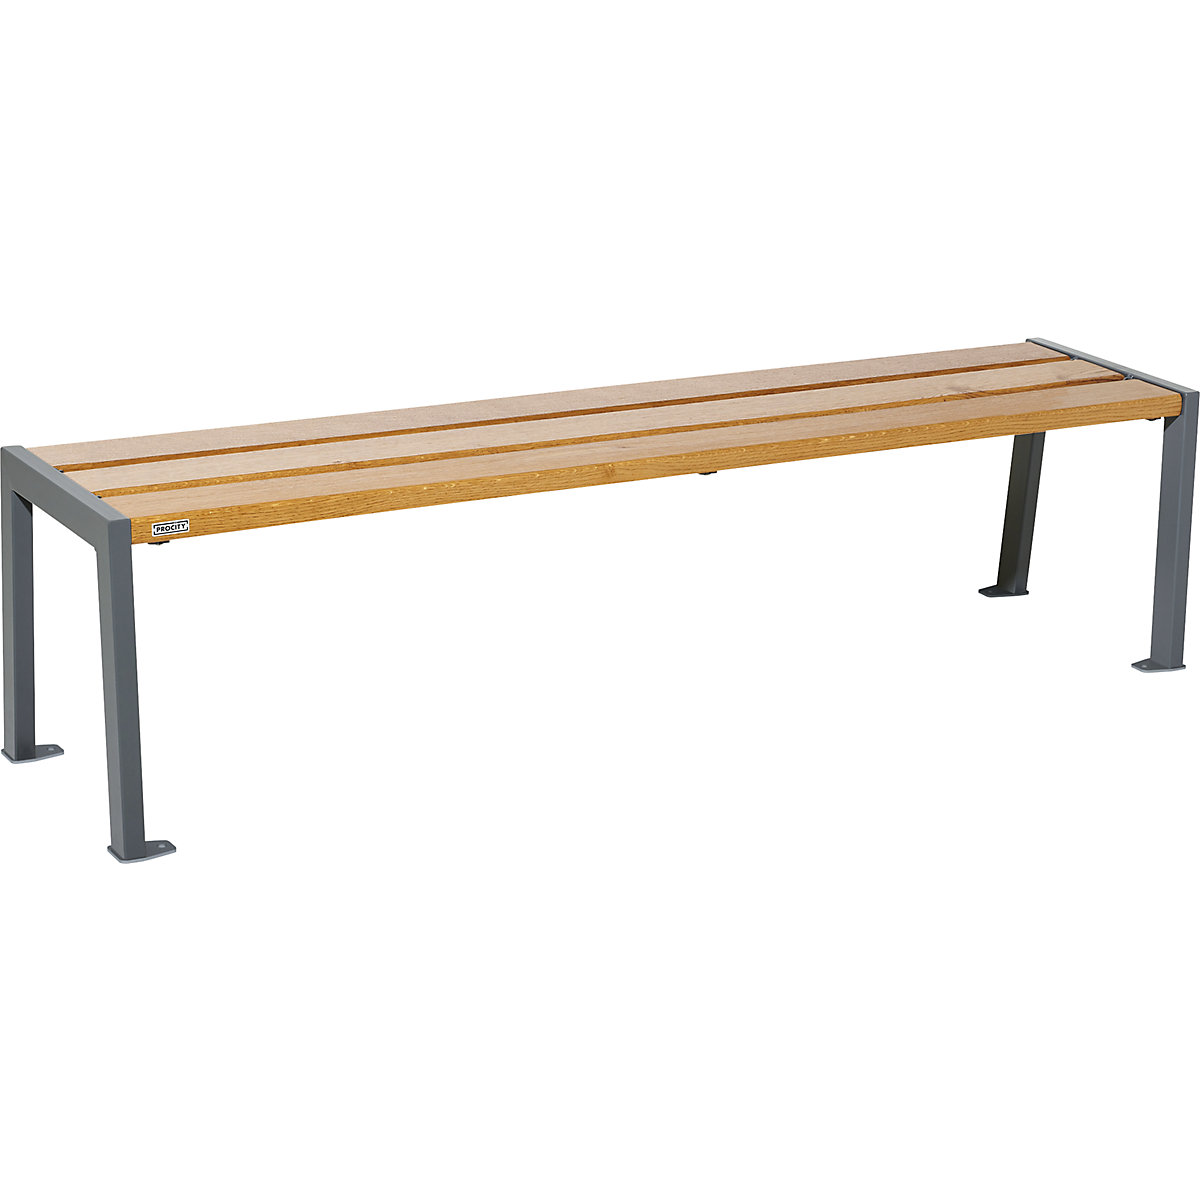 SILAOS® wooden bench without back rest – PROCITY, height 437 mm, length 1800 mm, charcoal, light oak finish-3